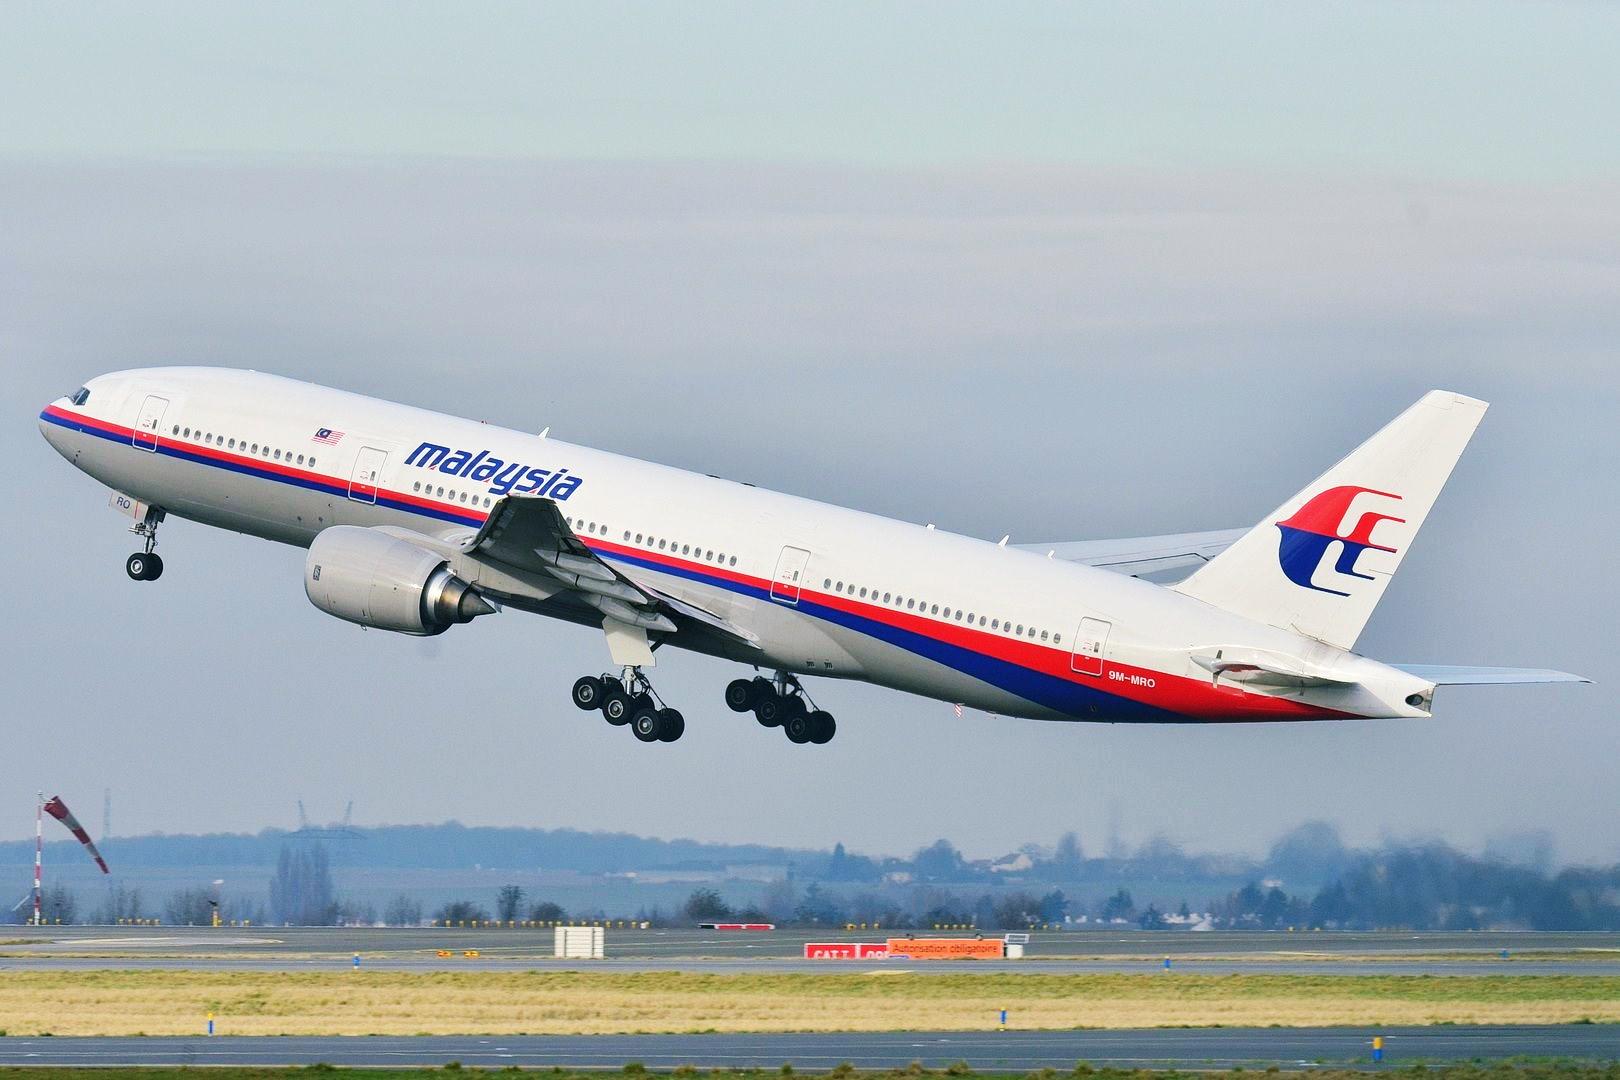 Malaysia's Missing Airlines plane